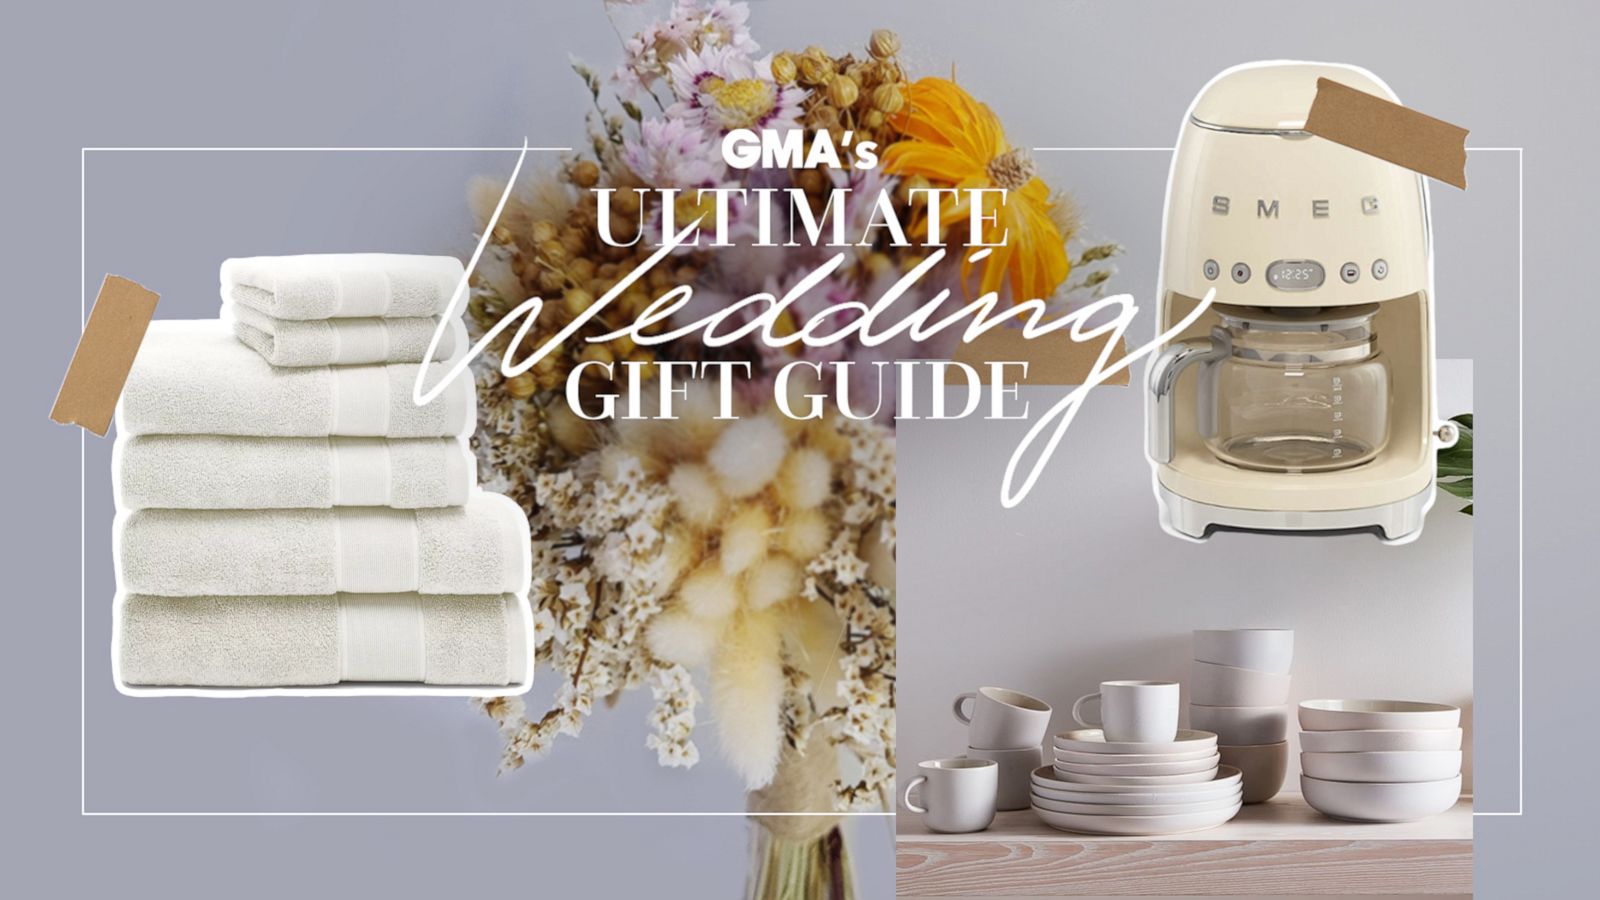 GMA' Ultimate Wedding Gift Guide: See top picks to shop for the season -  Good Morning America